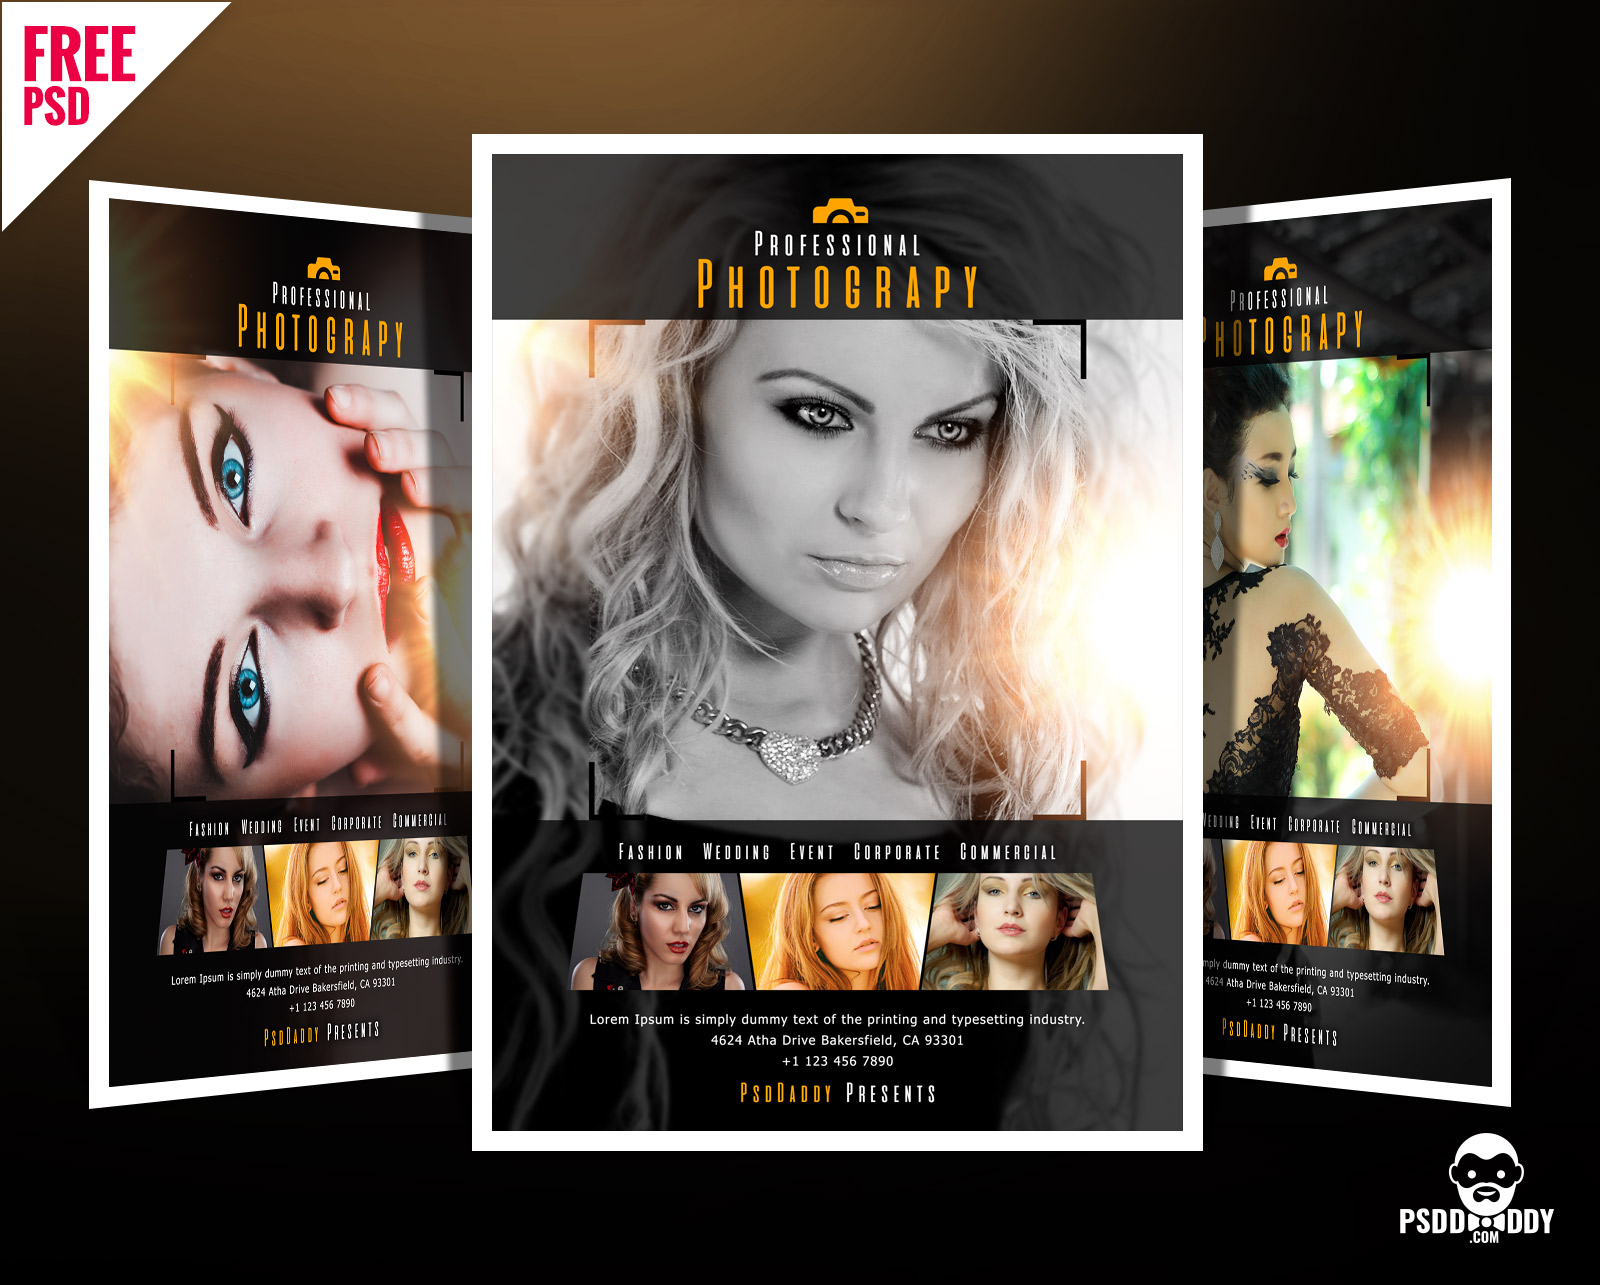 Download]Professional Photography Flyer PSD  PsdDaddy.com In Photography Flyer Templates Photoshop